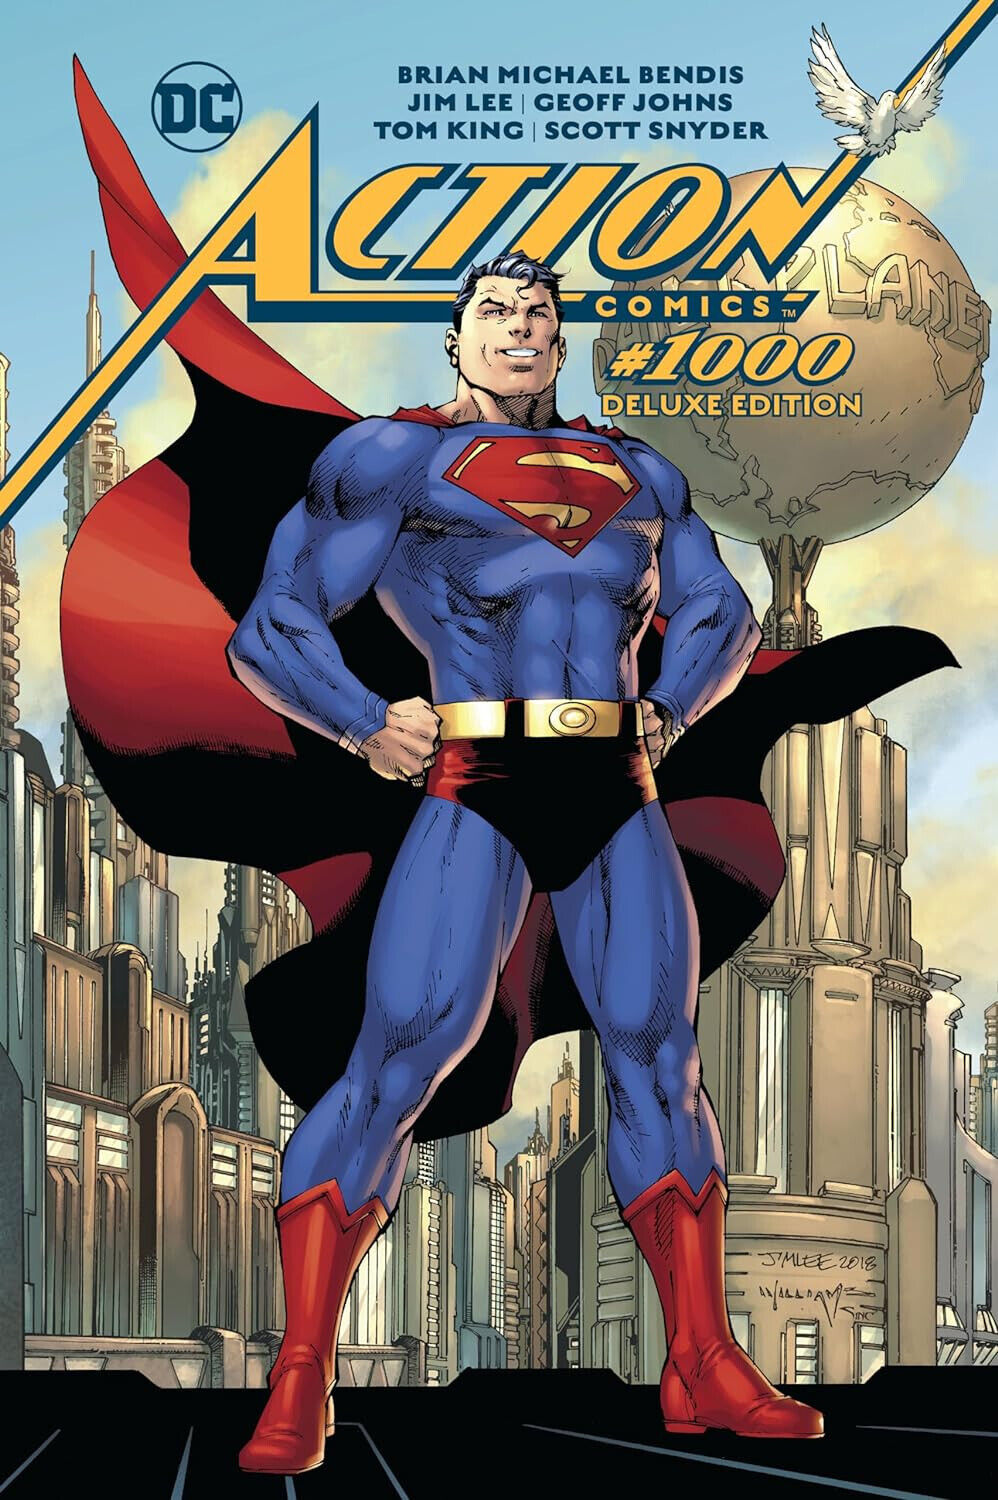 Action Comics #1000: The Deluxe Edition Hardcover Graphic Novel New, Sealed